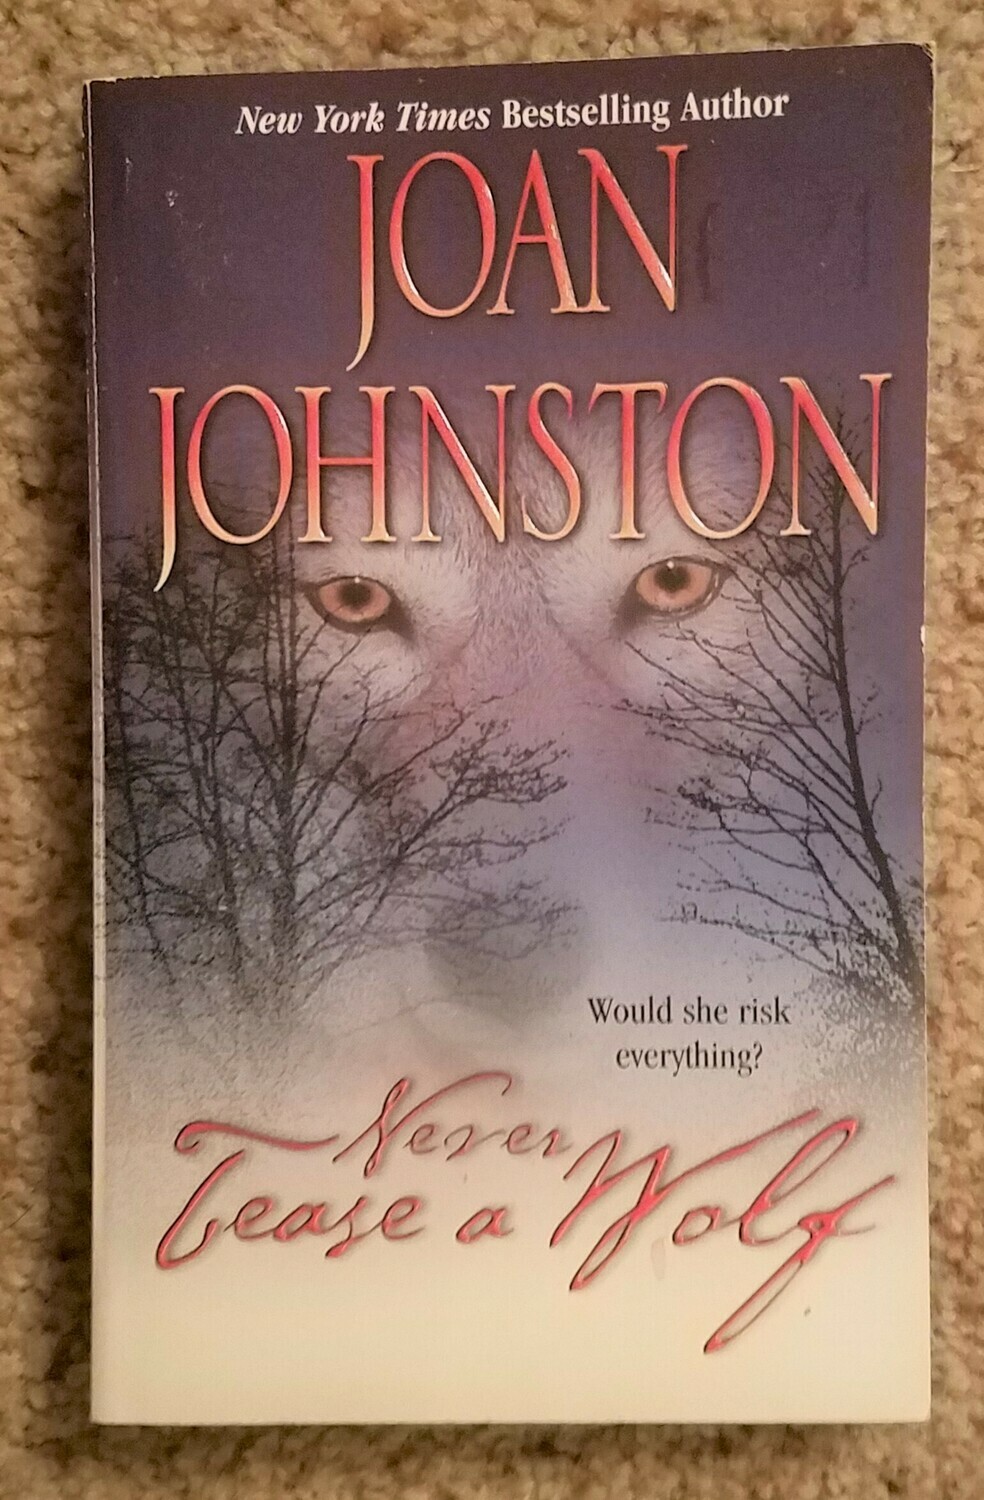 Never Tease a Wolf by Joan Johnston